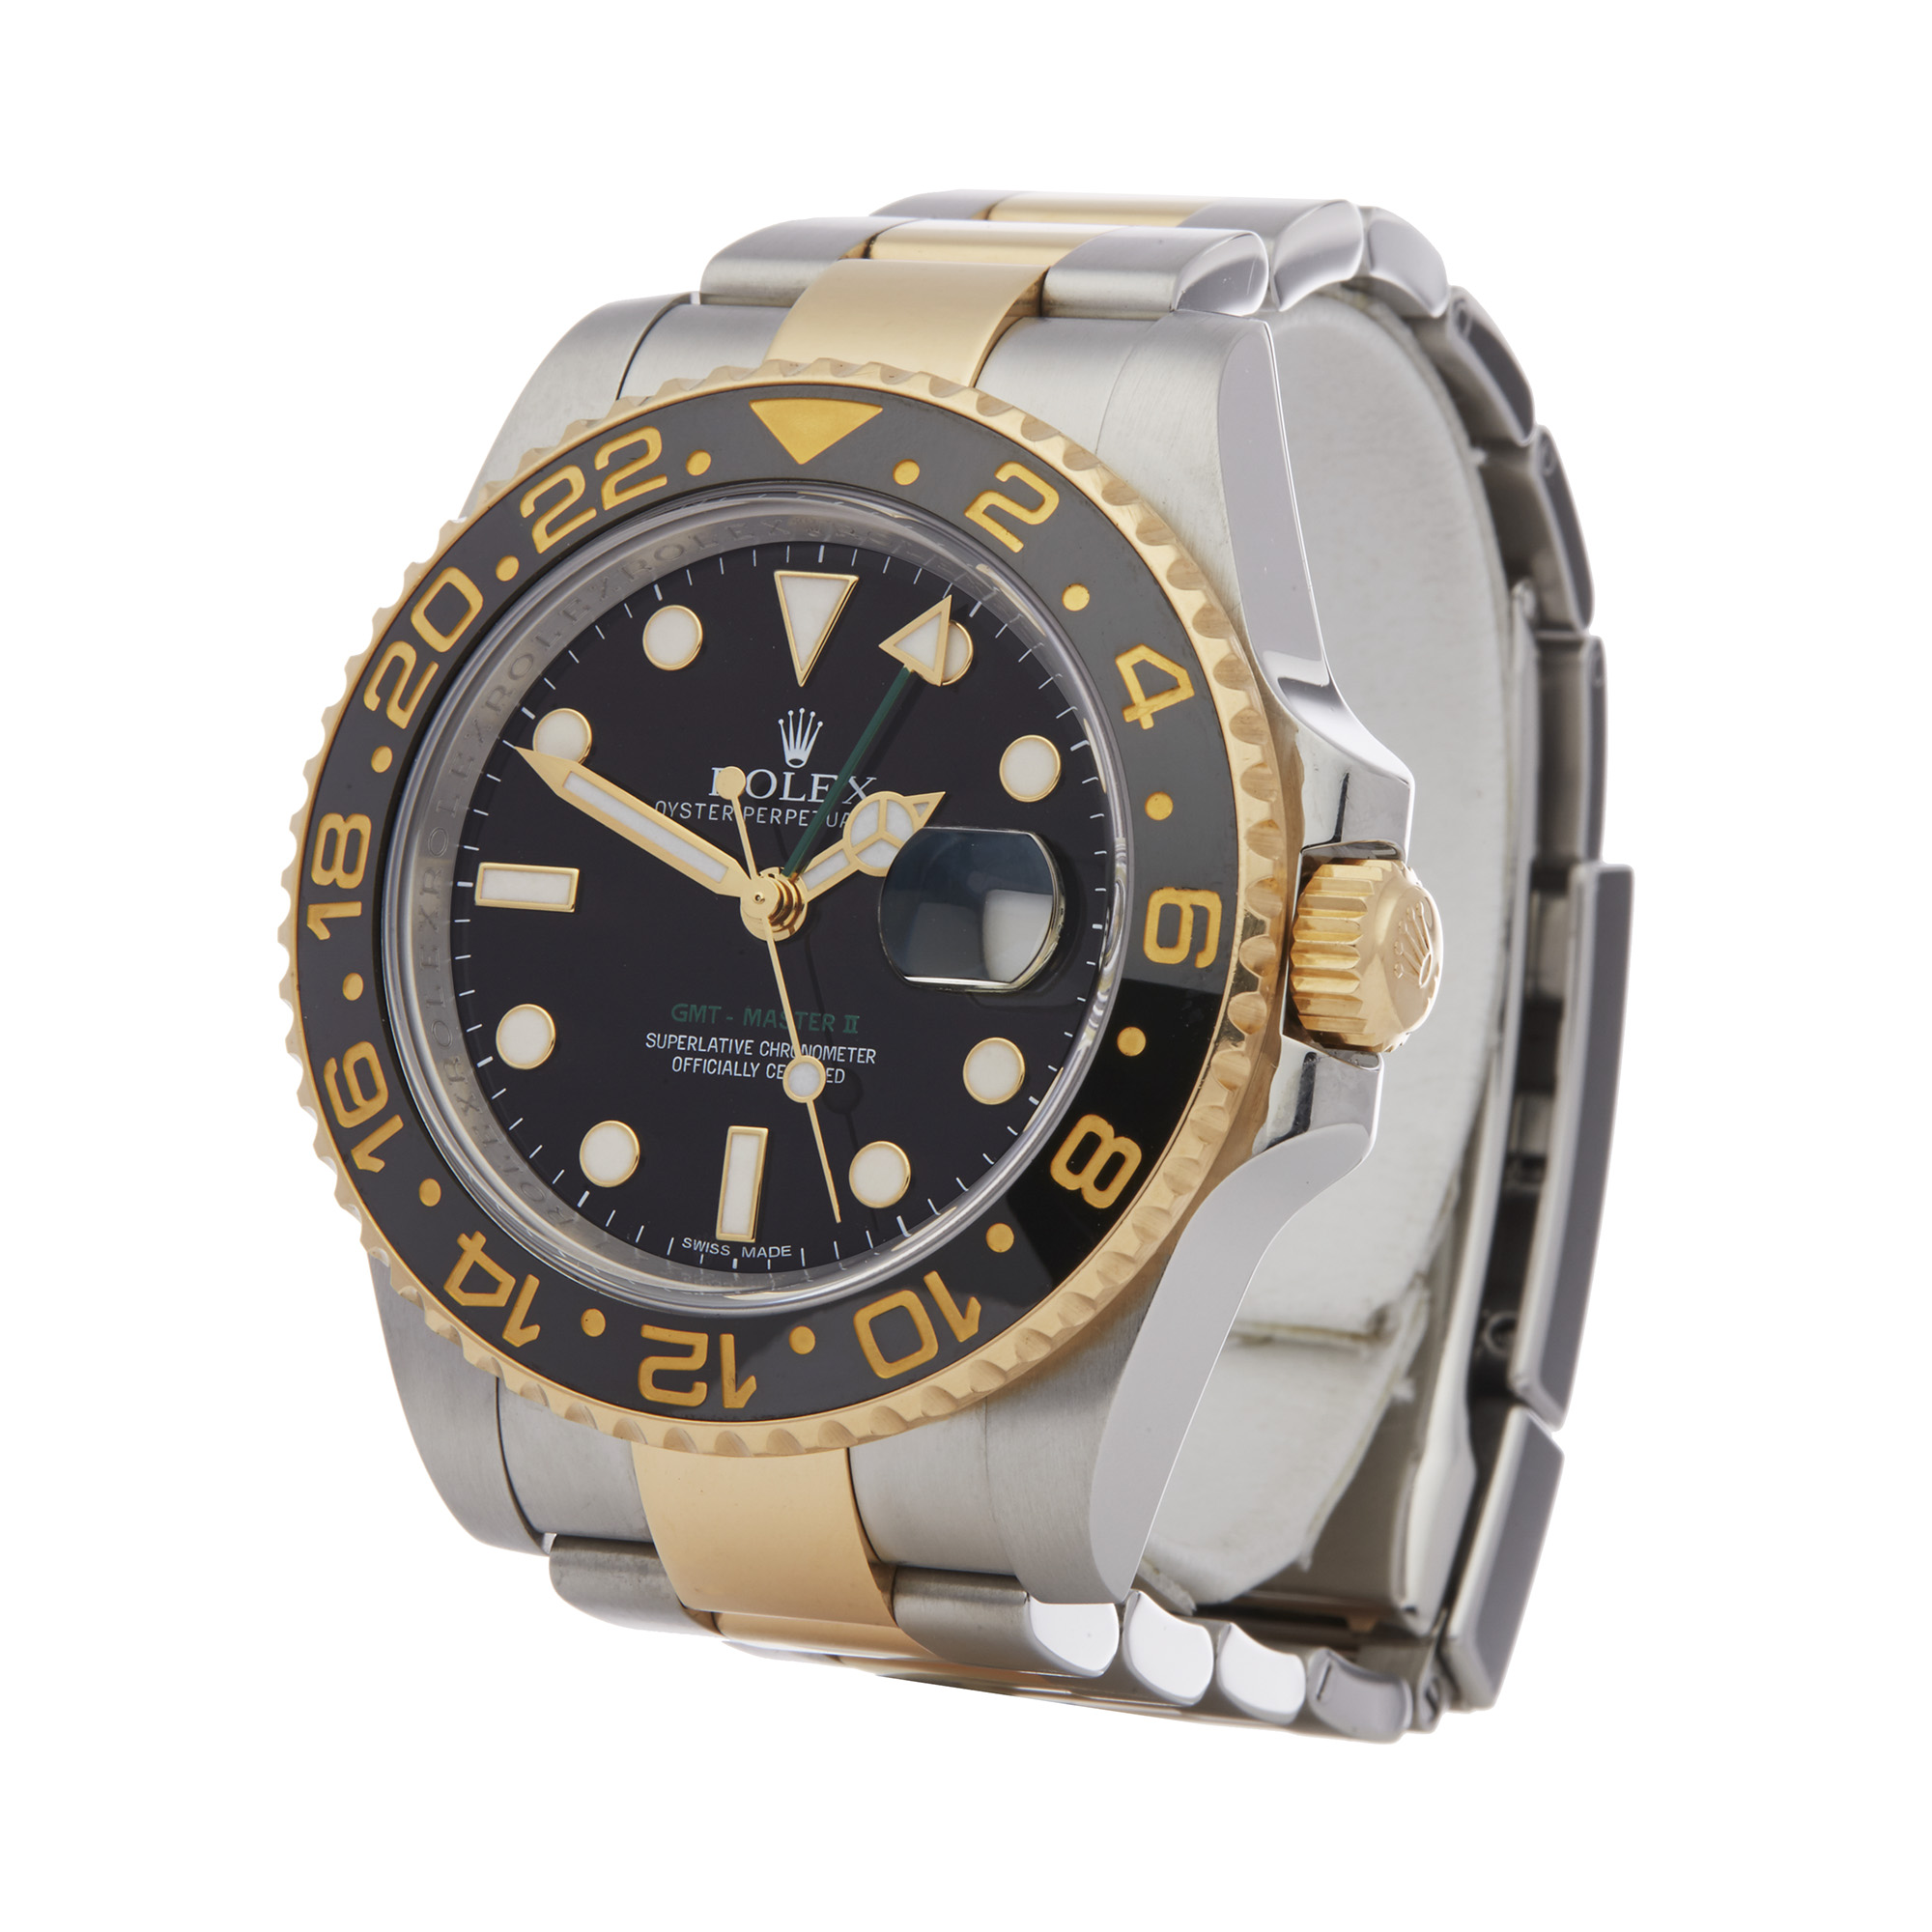 Rolex GMT-Master II 116713LN Men's Yellow Gold & Stainless Steel Watch - Image 8 of 9